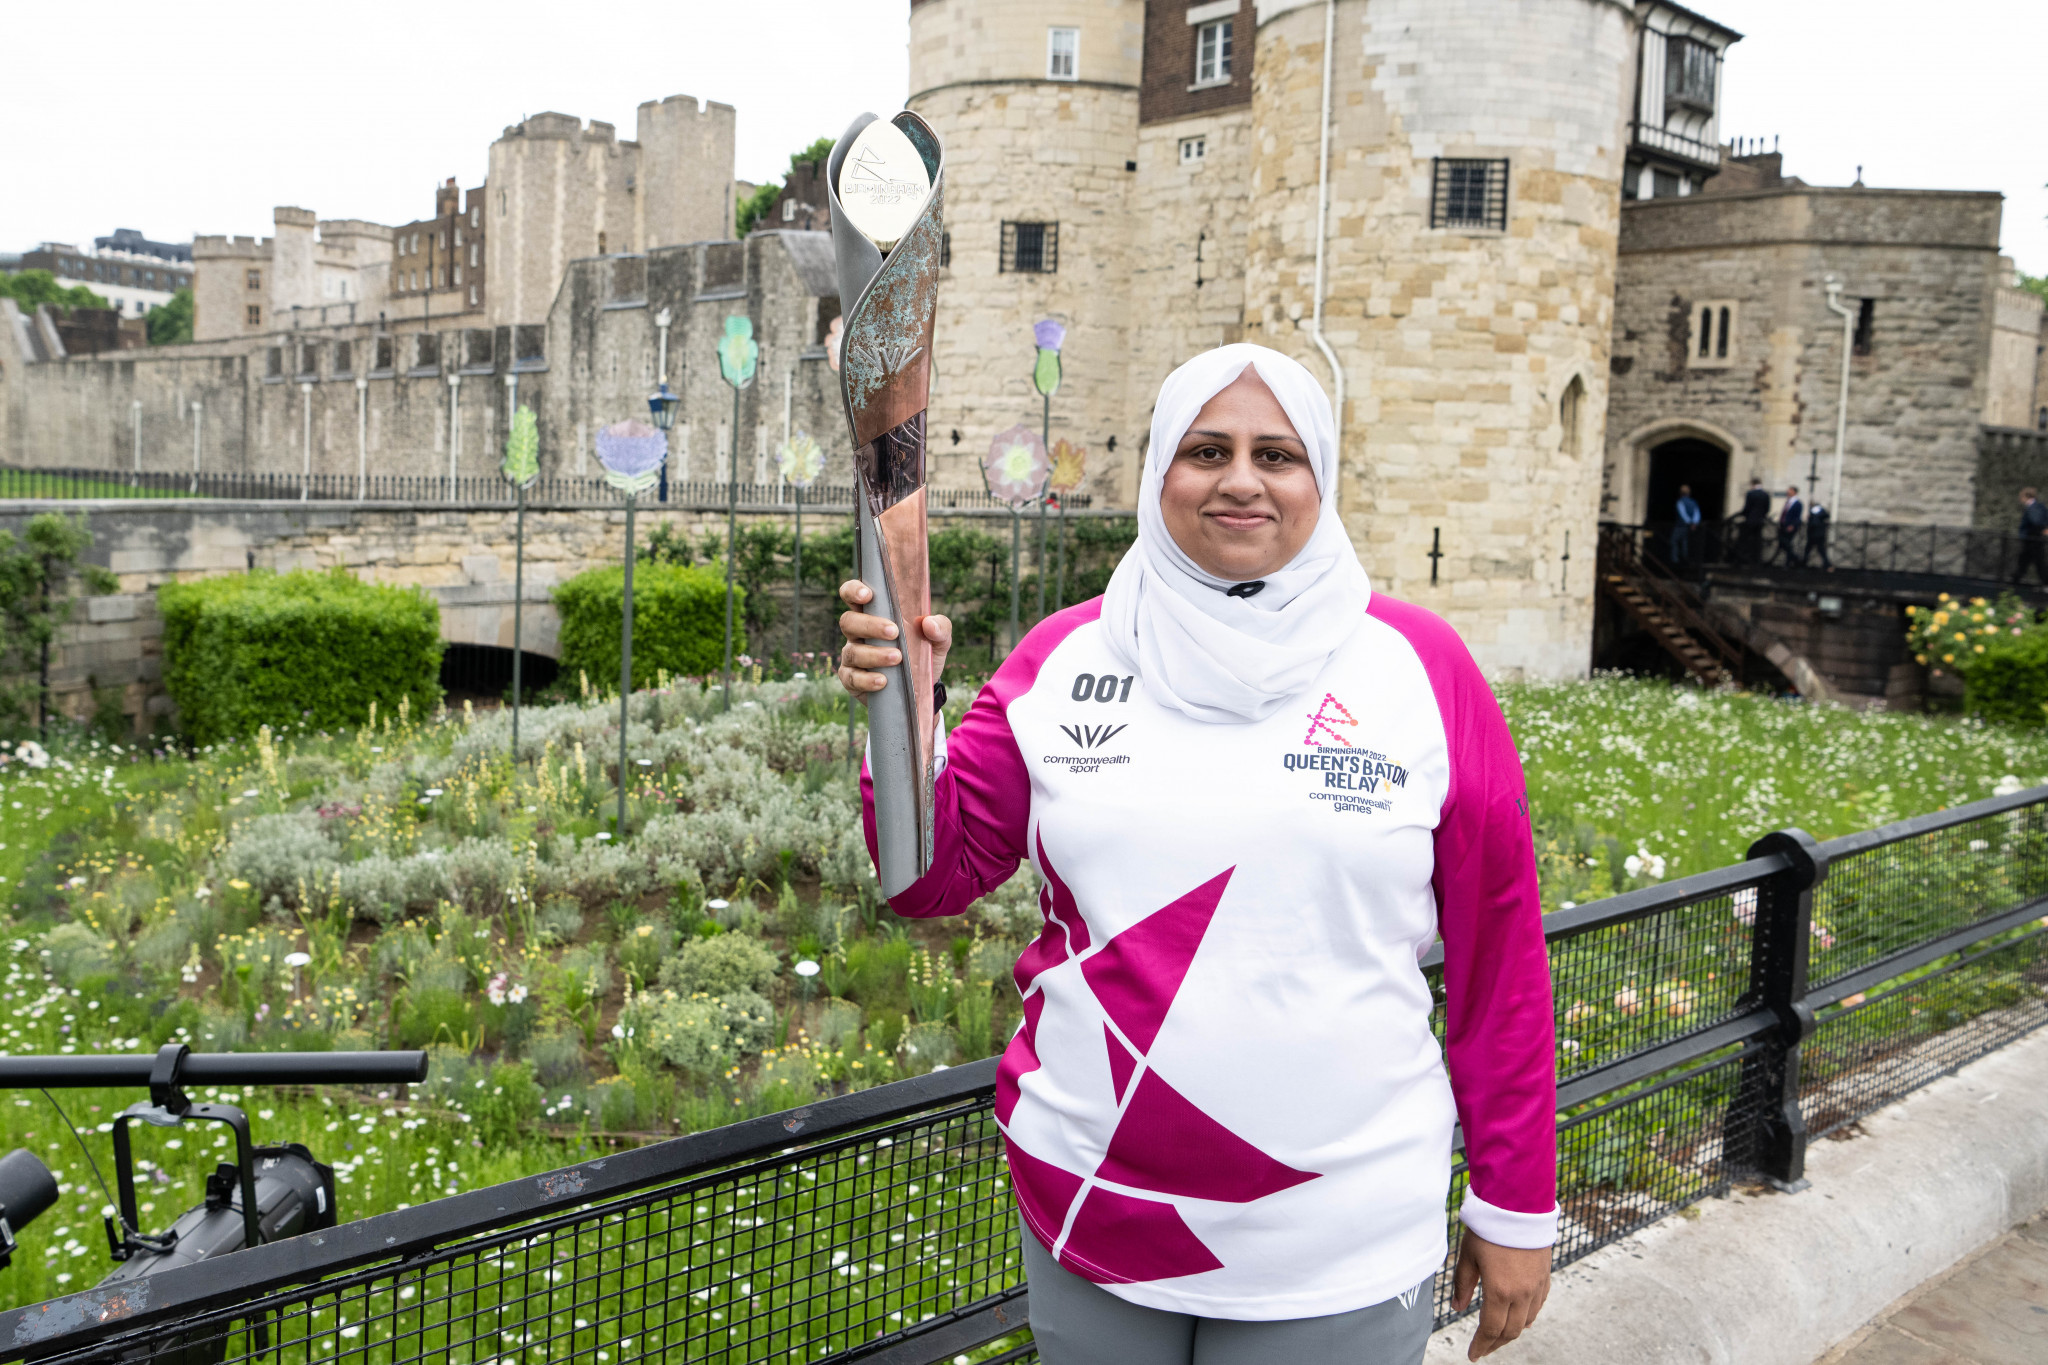 After spending the night in the Tower of London Jewel House, the Baton was carried by bearers around the Superbloom installation at the castle ©Birmingham 2022